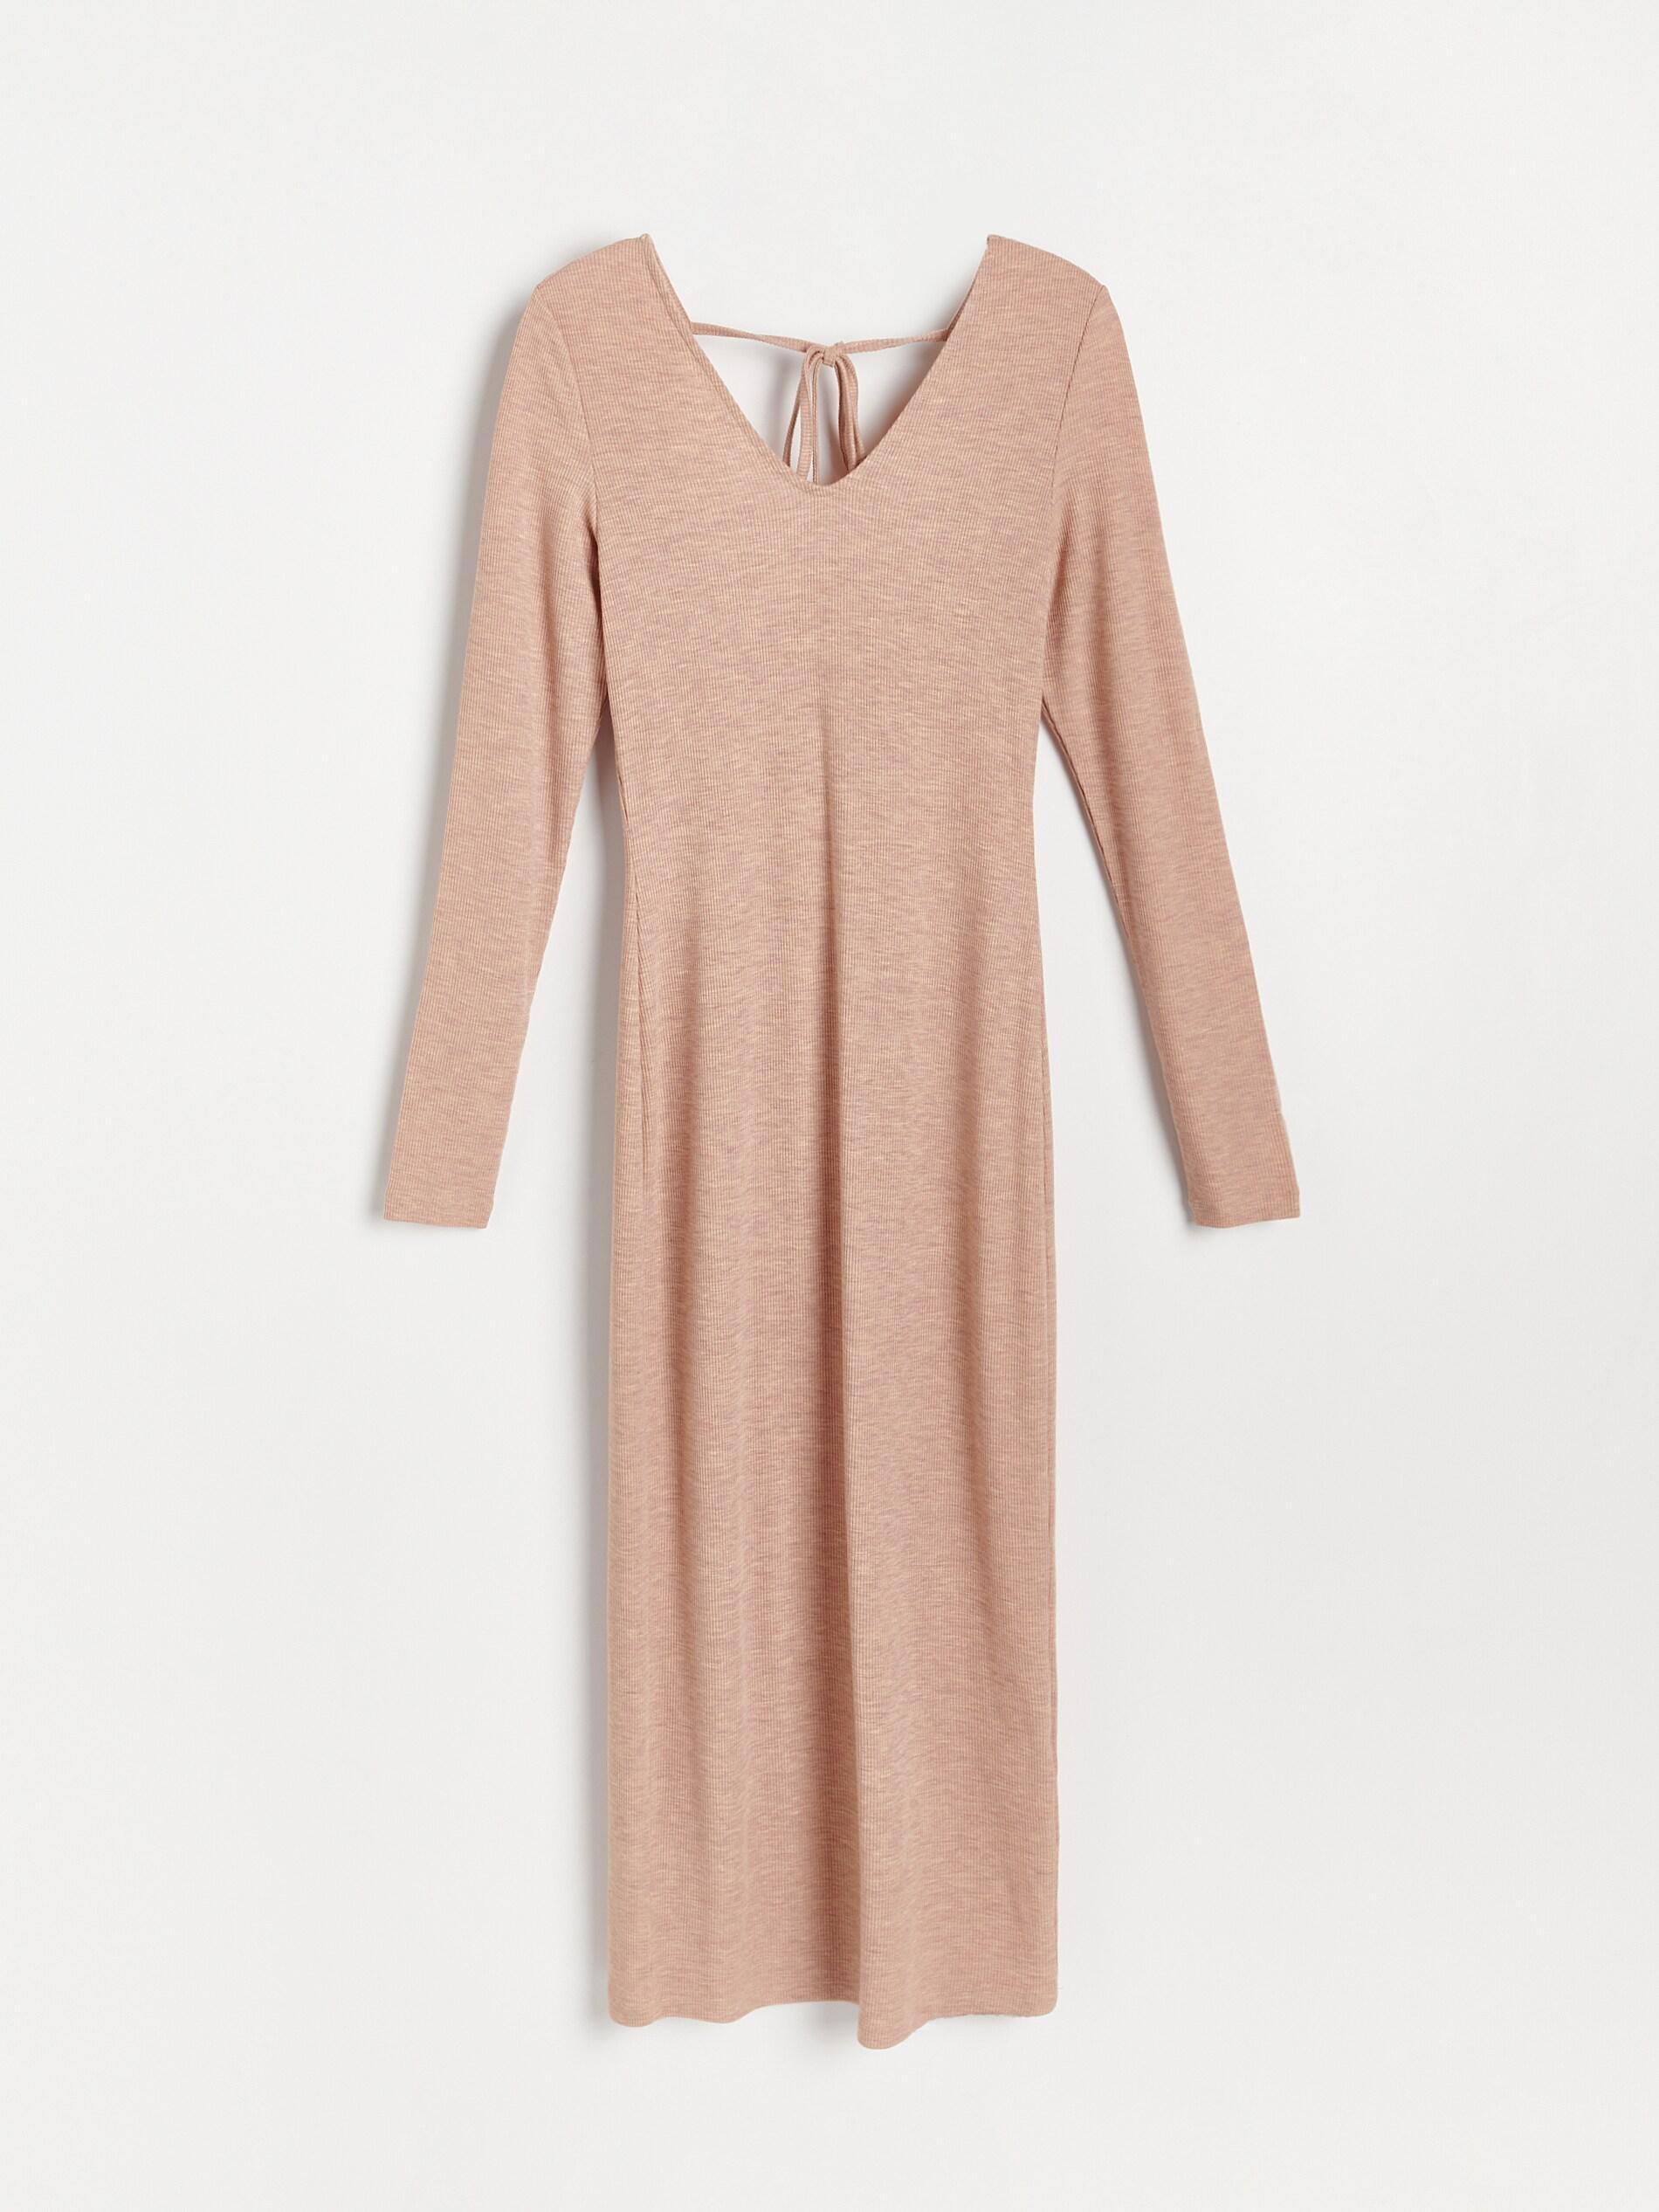 Reserved - Beige Knitted Dress, Women